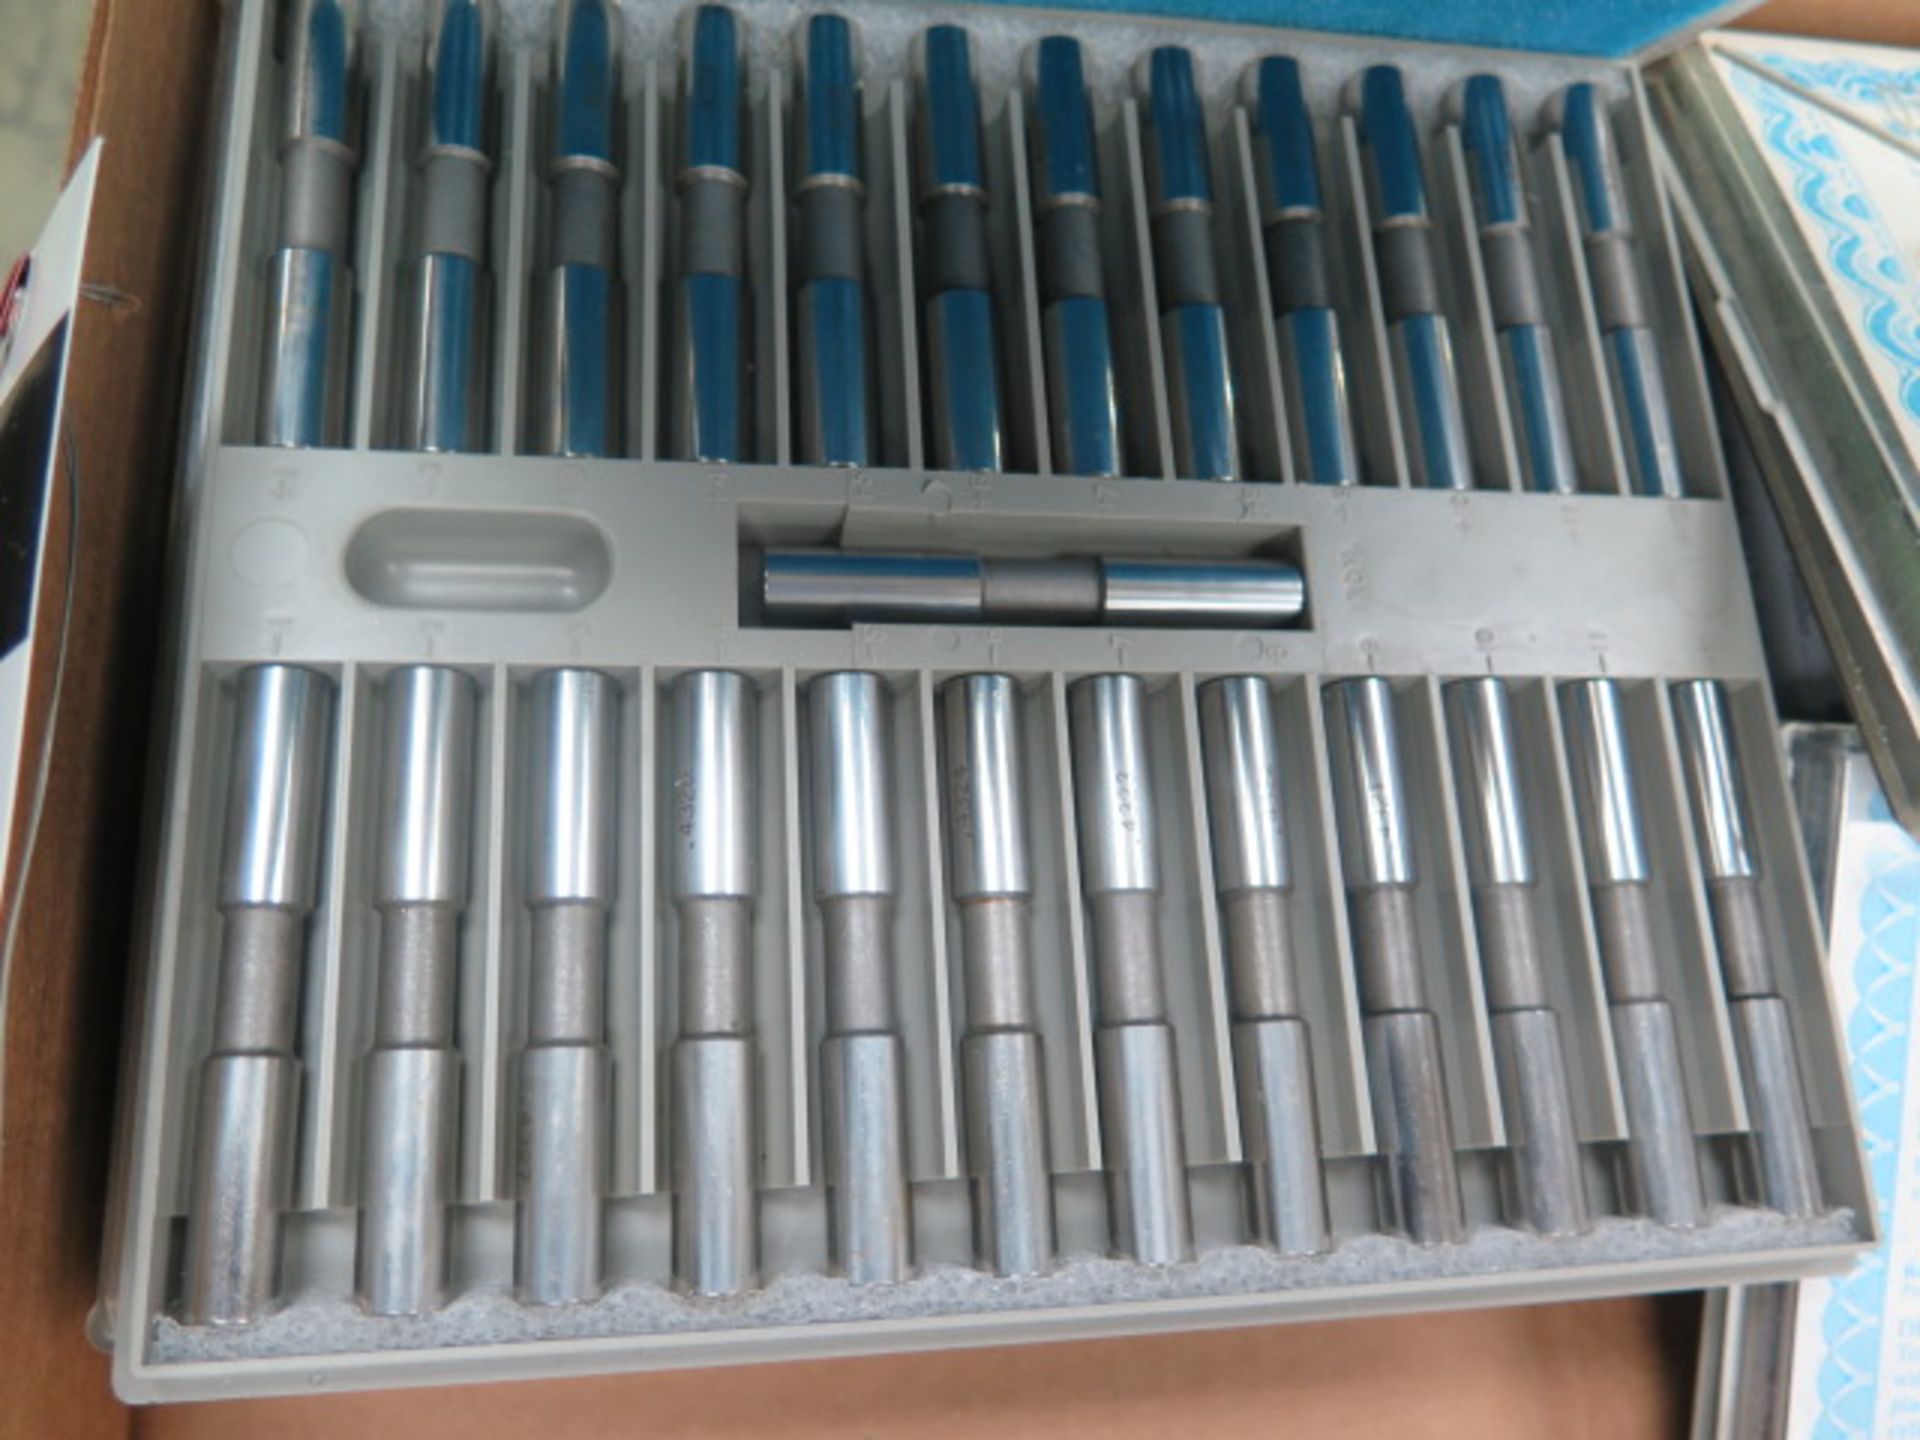 Deltronic Gage Pin Sets (SOLD AS-IS - NO WARRANTY) - Image 3 of 3